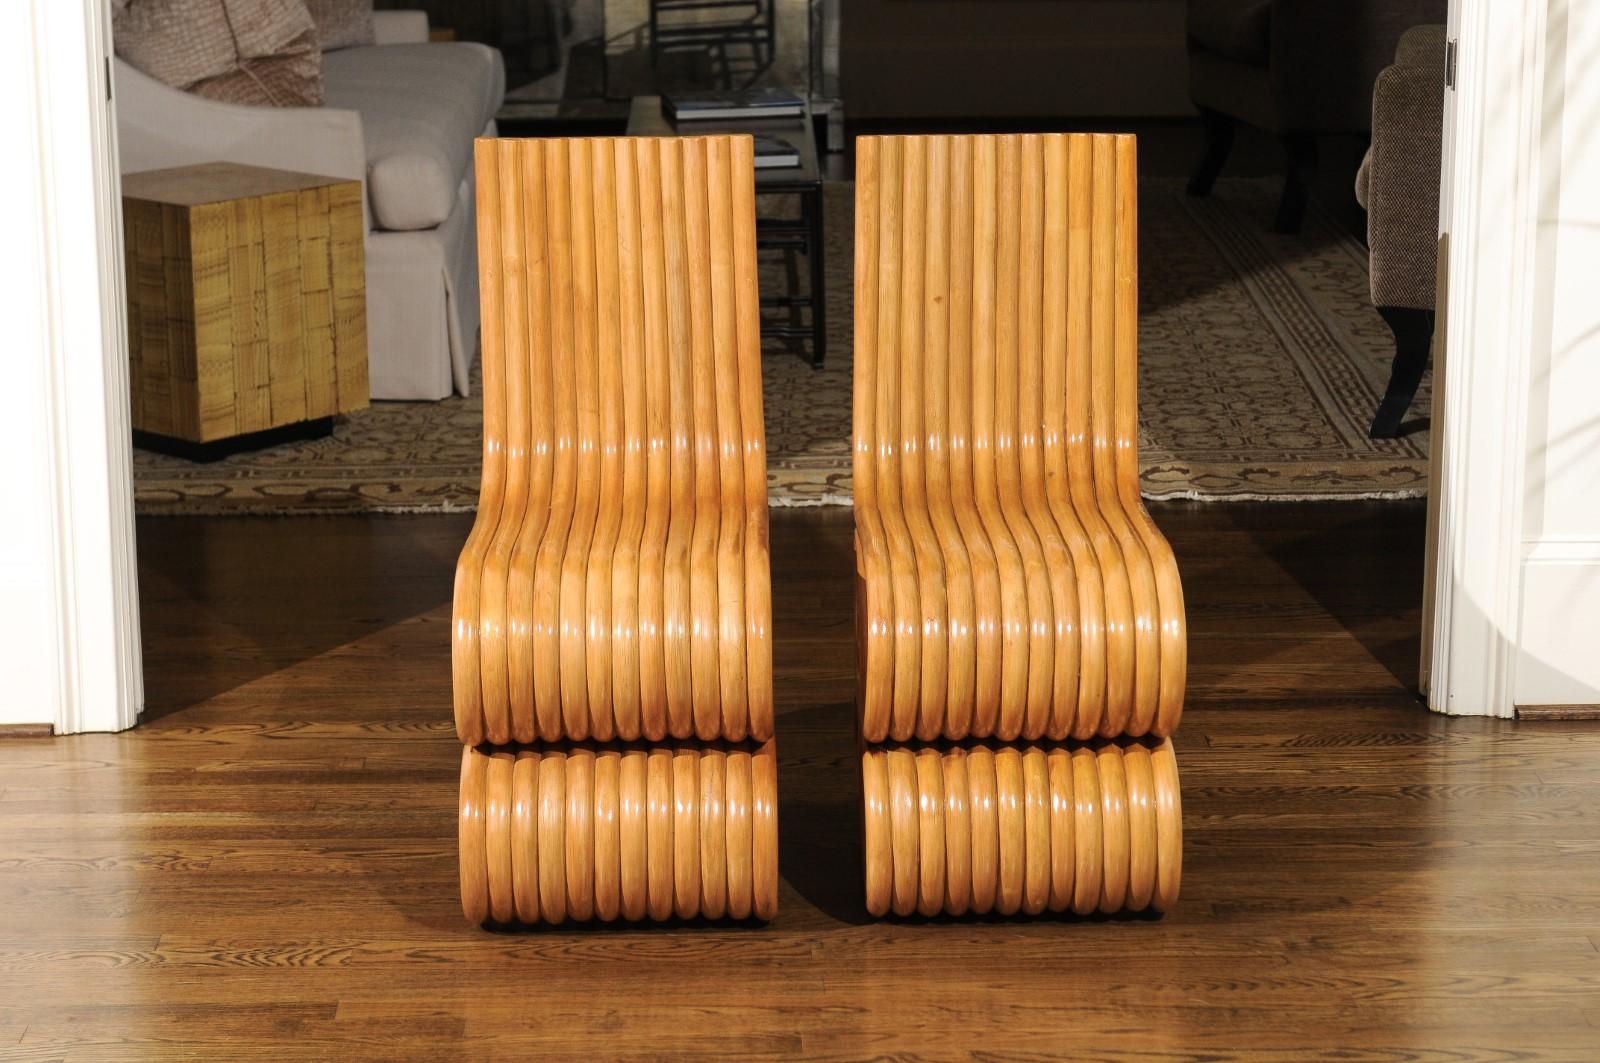 A unique set of eight stunning custom made dining chairs, circa 1995. This particular rattan design was undoubtedly inspired by the groundbreaking Frank Gehry Wiggle chair series of the early 1970s. This fabulous set was custom commissioned for the